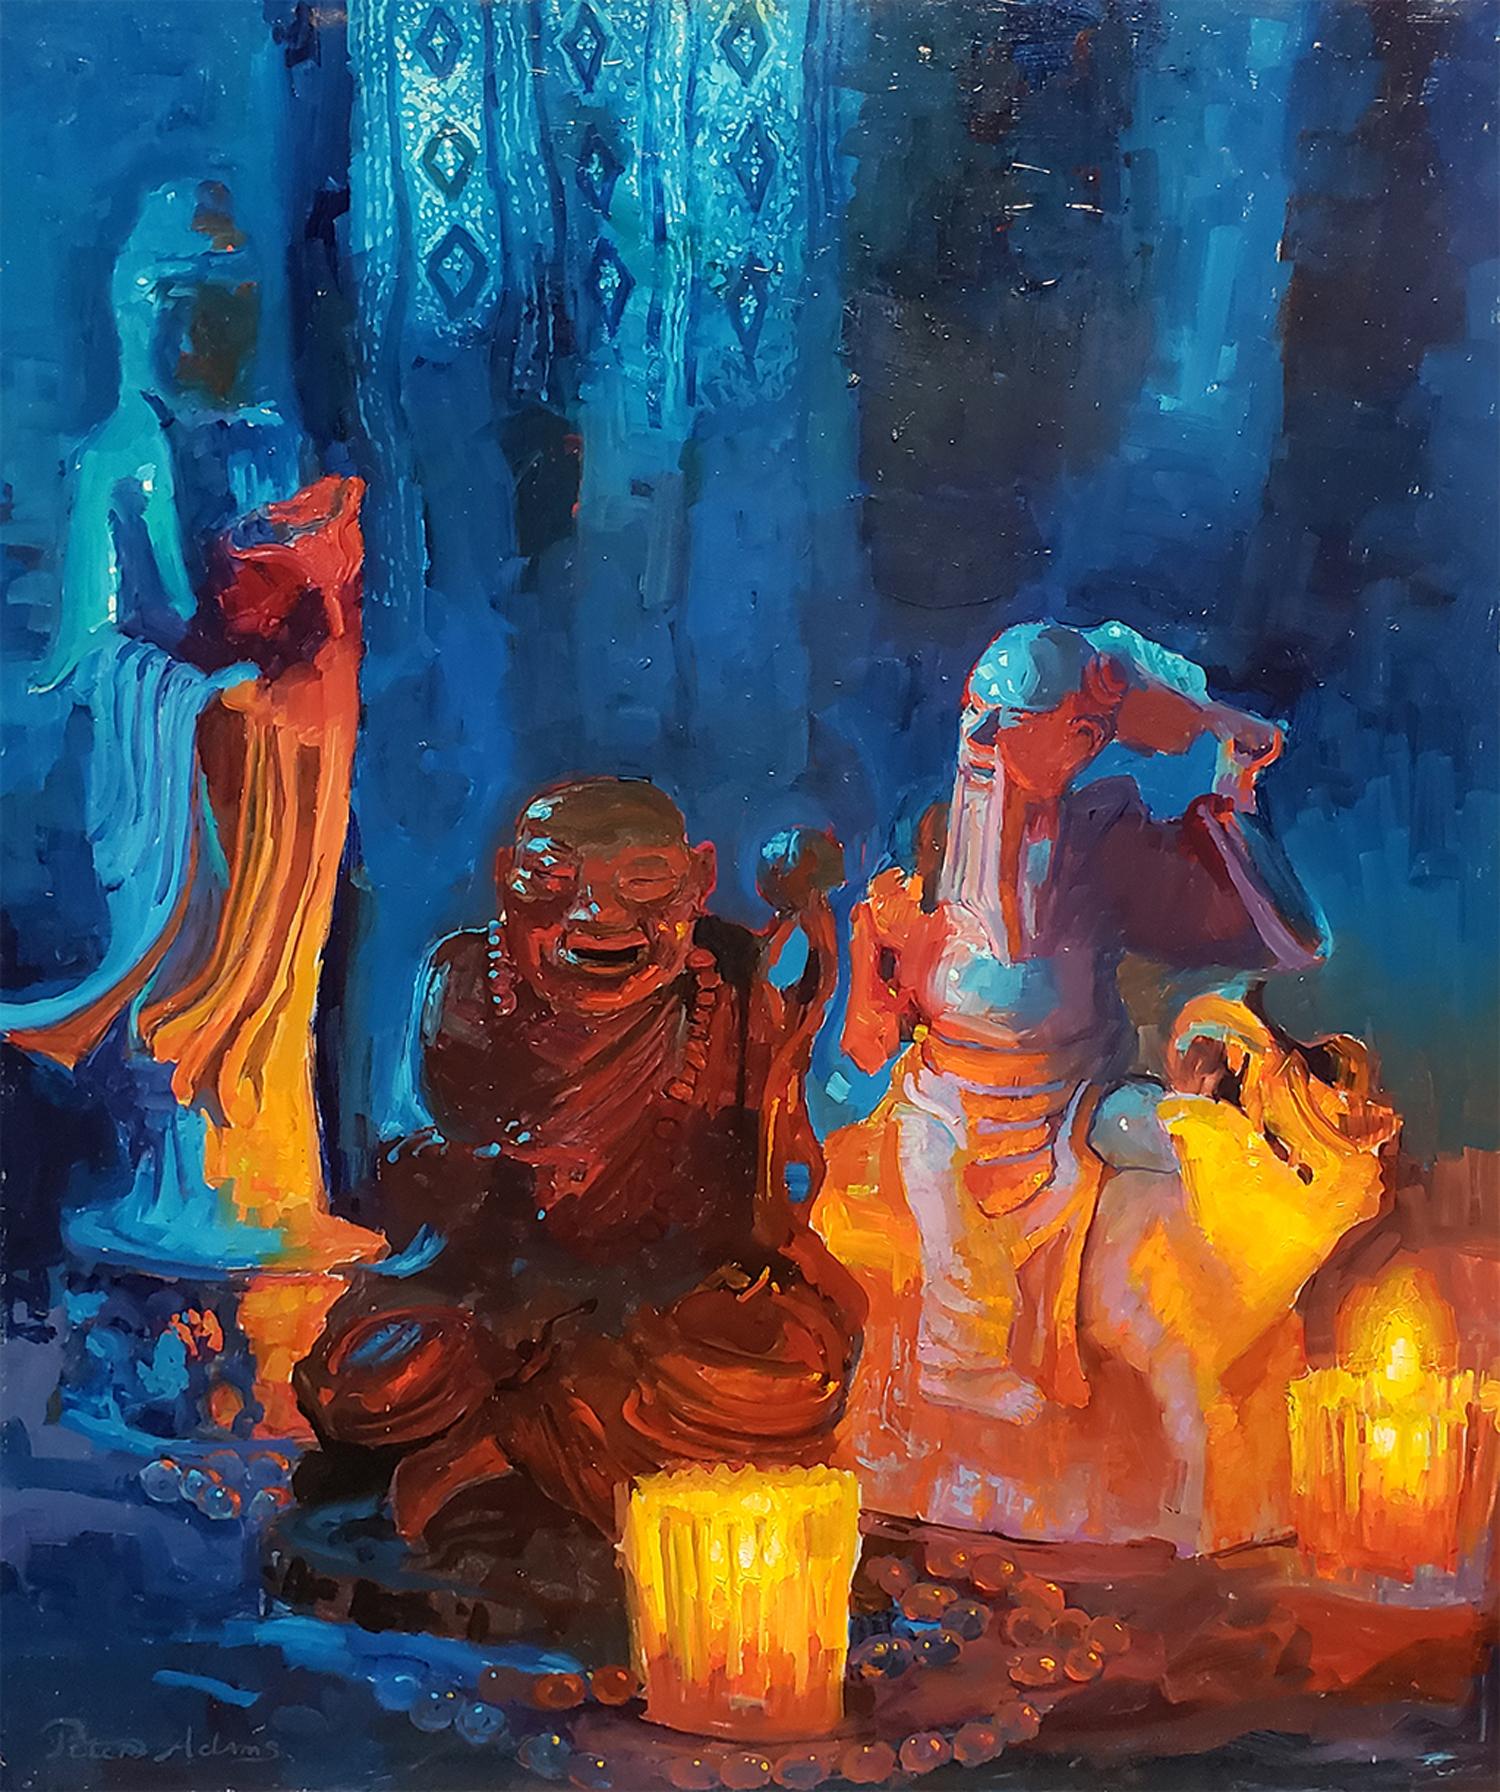 Two Lohans and Kwan Yin - Painting by Peter Adams